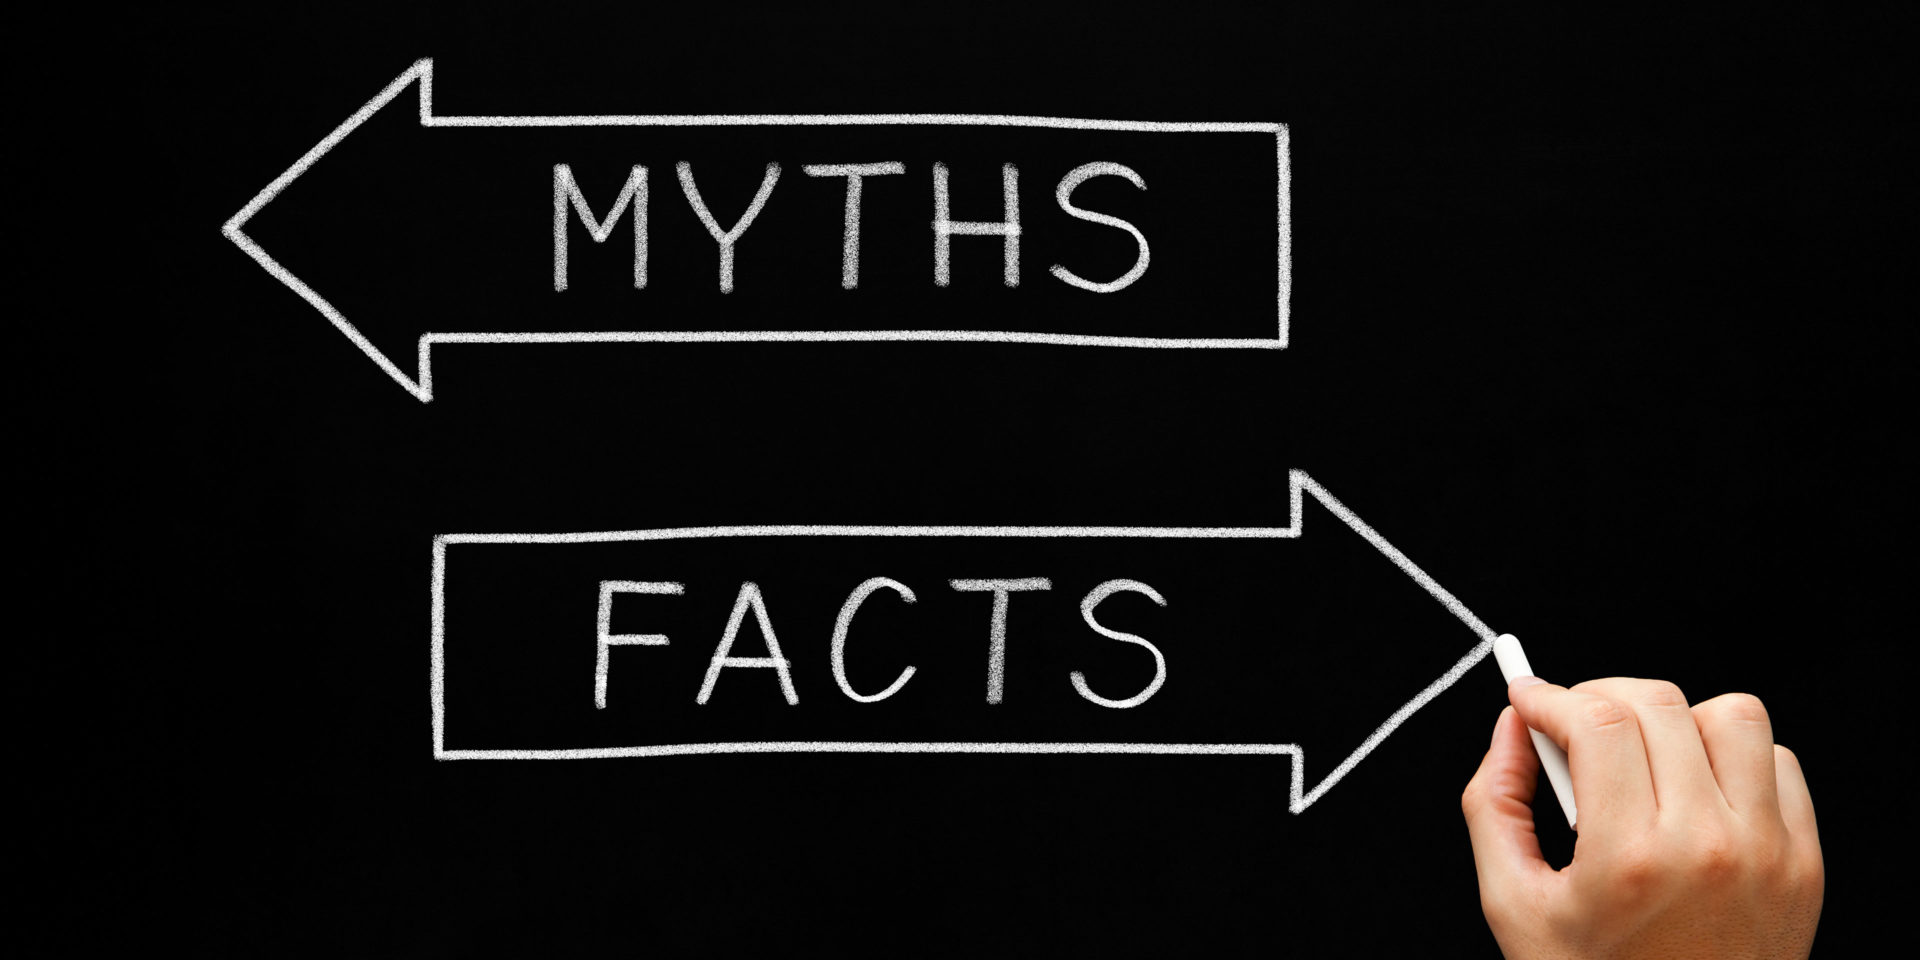 Myths Versus Facts